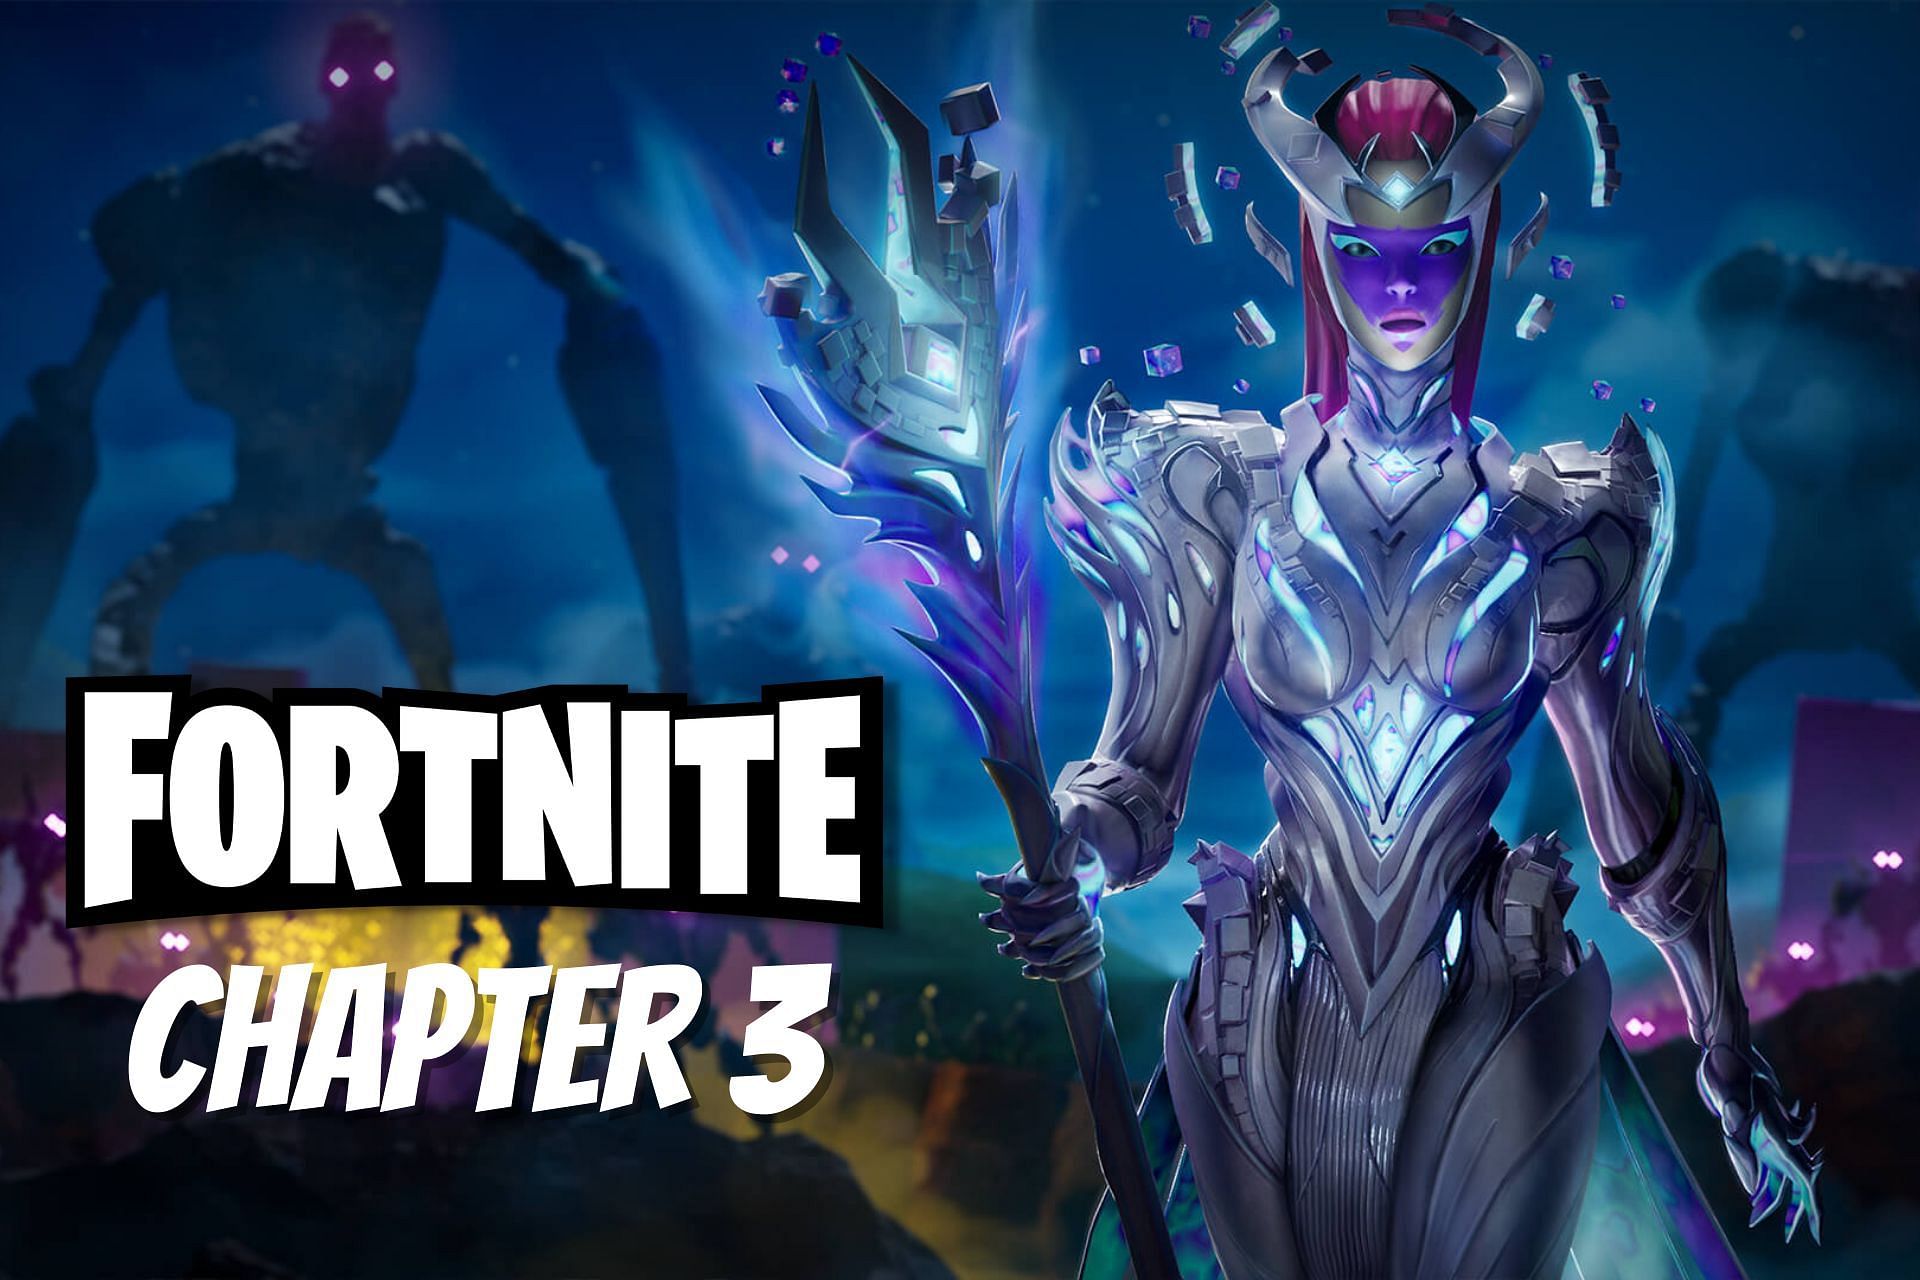 An Epic Games employee has confirmed the arrival of Fortnite Chapter 3 (Image via Sportskeeda)